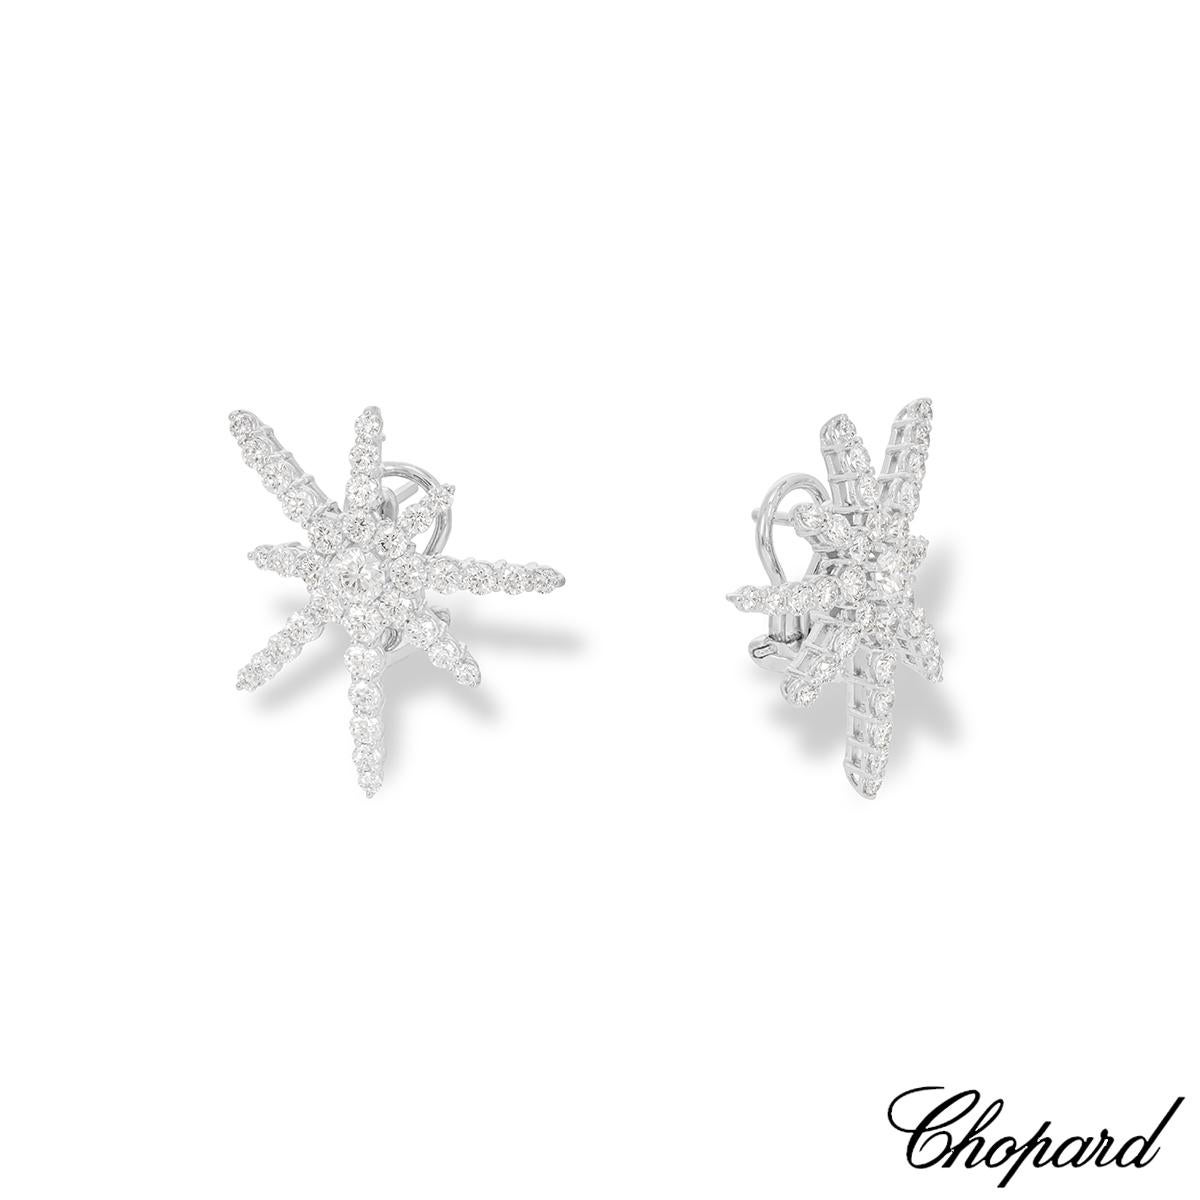 Round Cut Chopard White Gold Diamond Earrings 84/6525-1001 For Sale